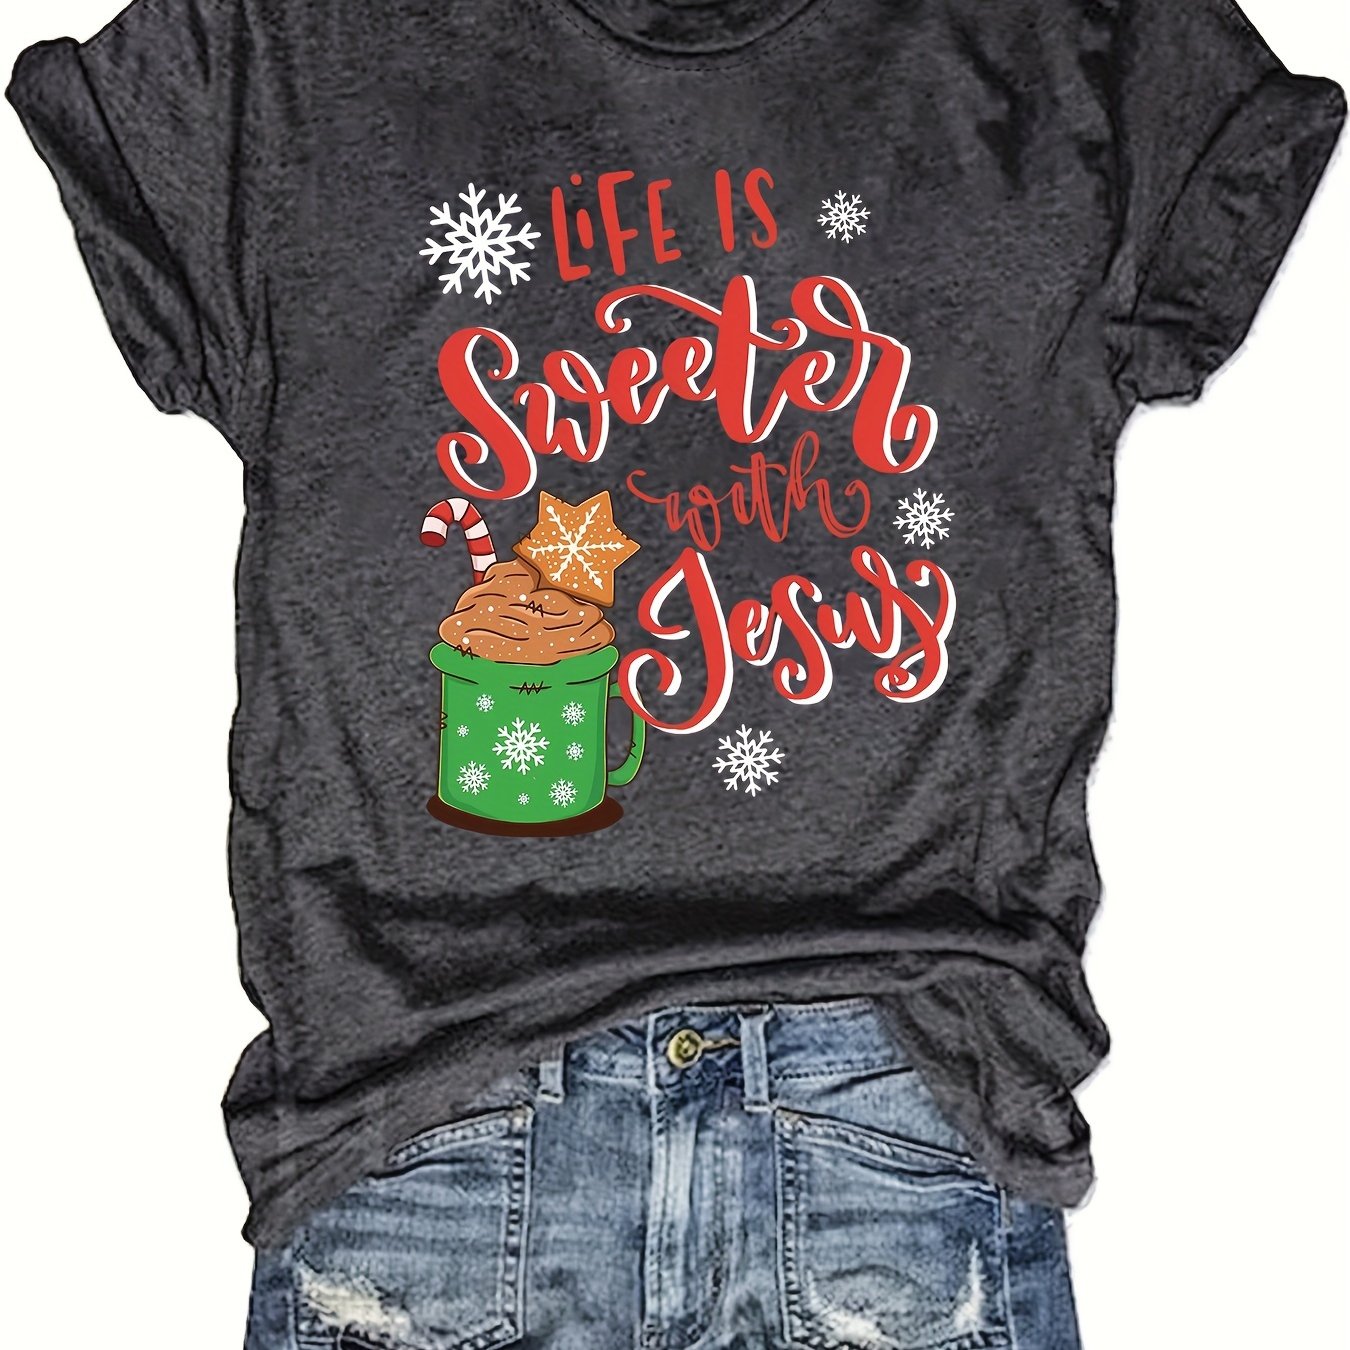 Life Is Sweeter With Jesus (Christmas themed) Women's Christian T-shirt claimedbygoddesigns